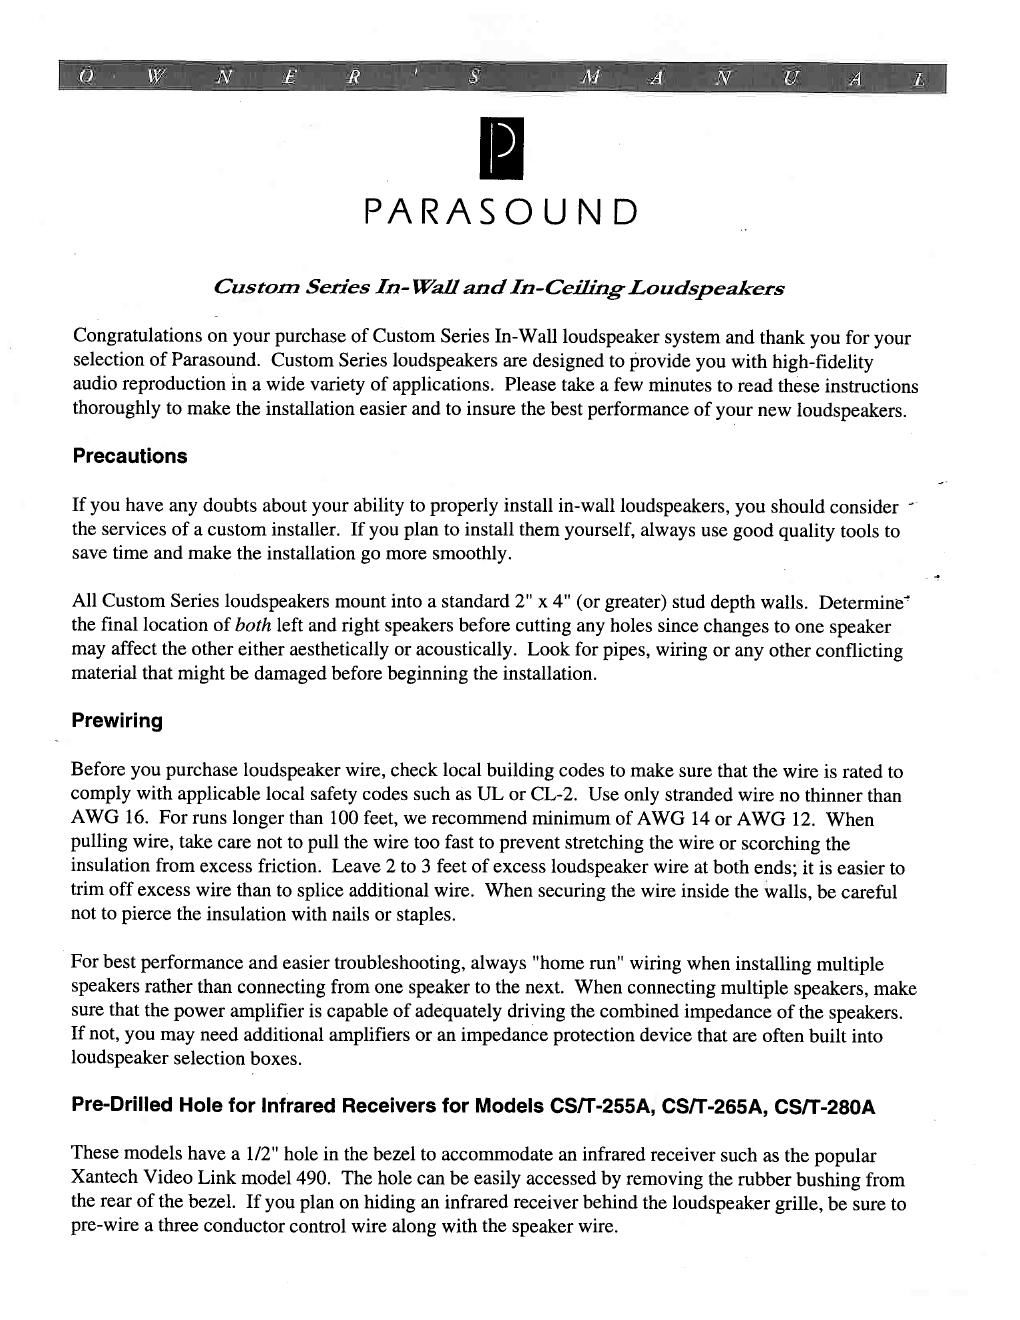 parasound cst 80 r owners manual